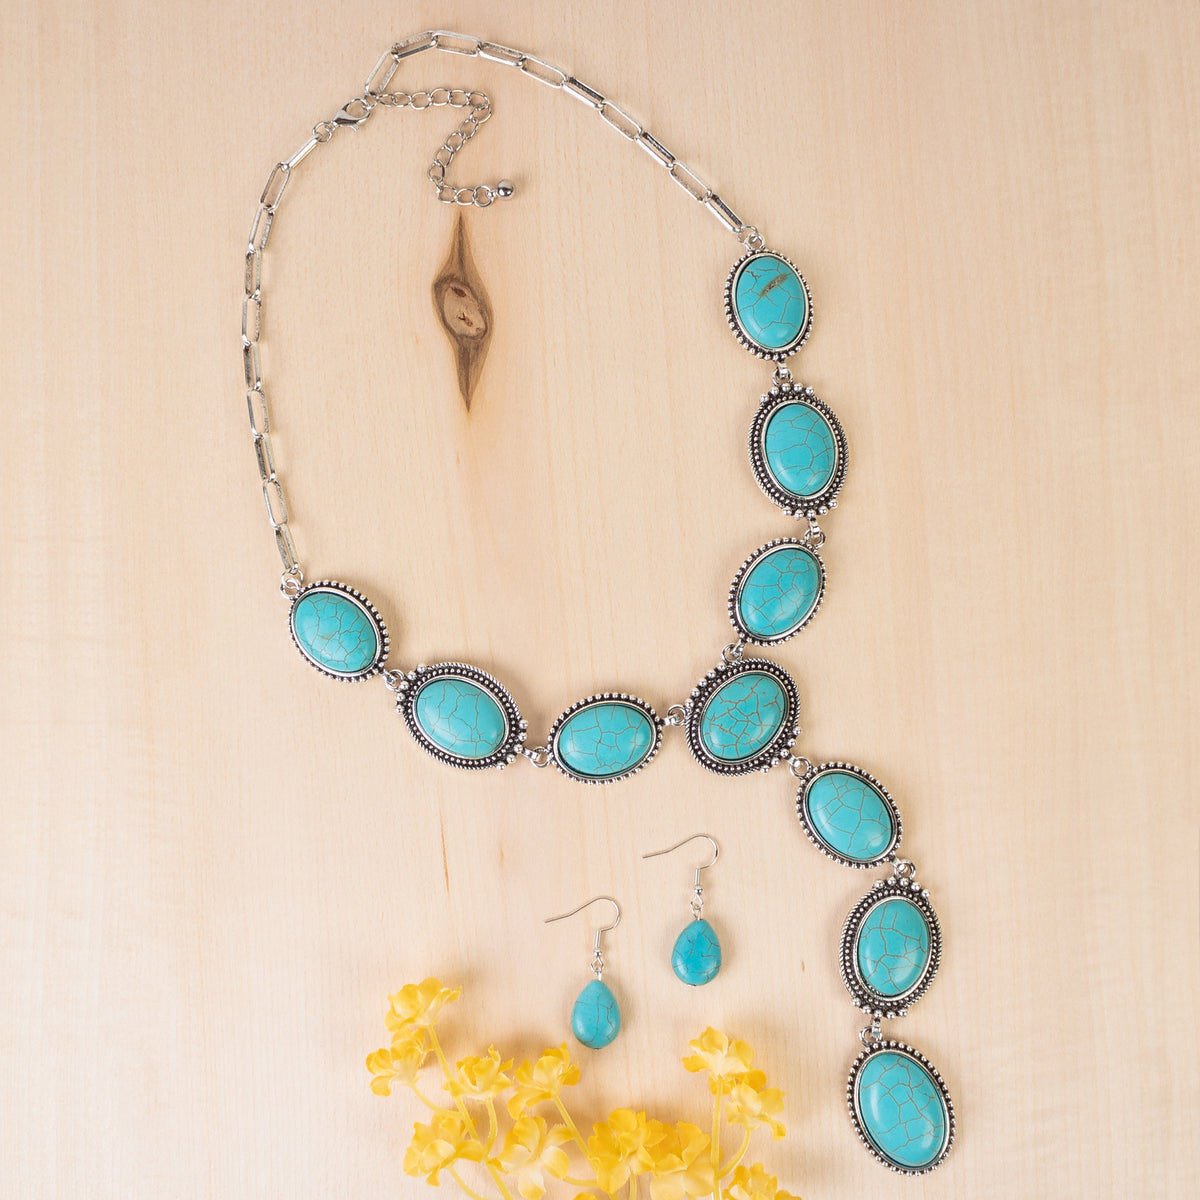 92011 - Squash Blossom Necklace - Turquoise & Silver